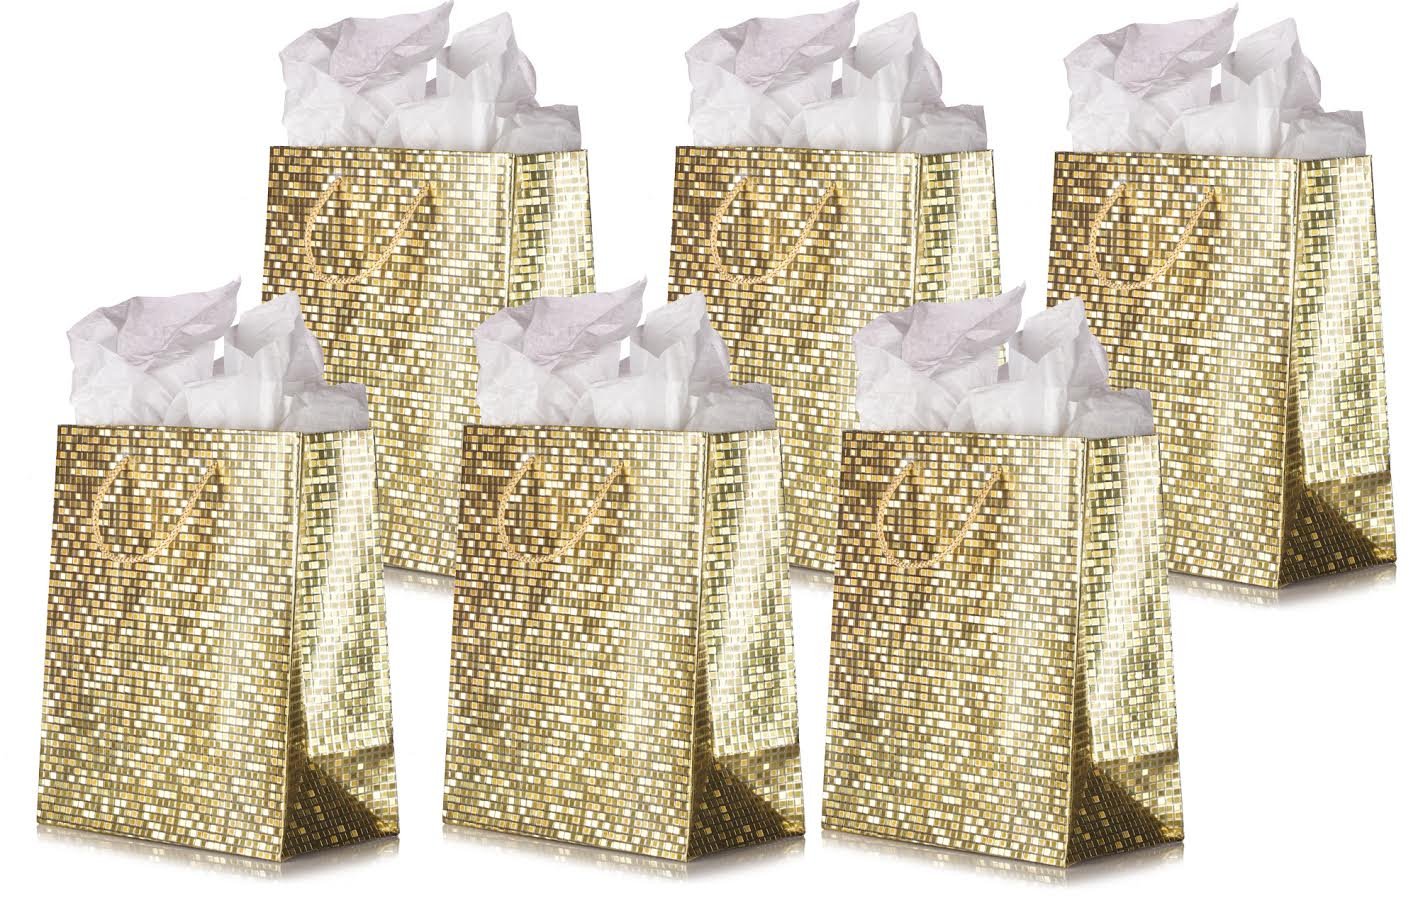 Gold Metallic Luxury Mosaic Tile Textured Print Design Gift Bag - Medium  Size Bag - (7.75 x 9.88) 6 PACK for Any Celebration or Event